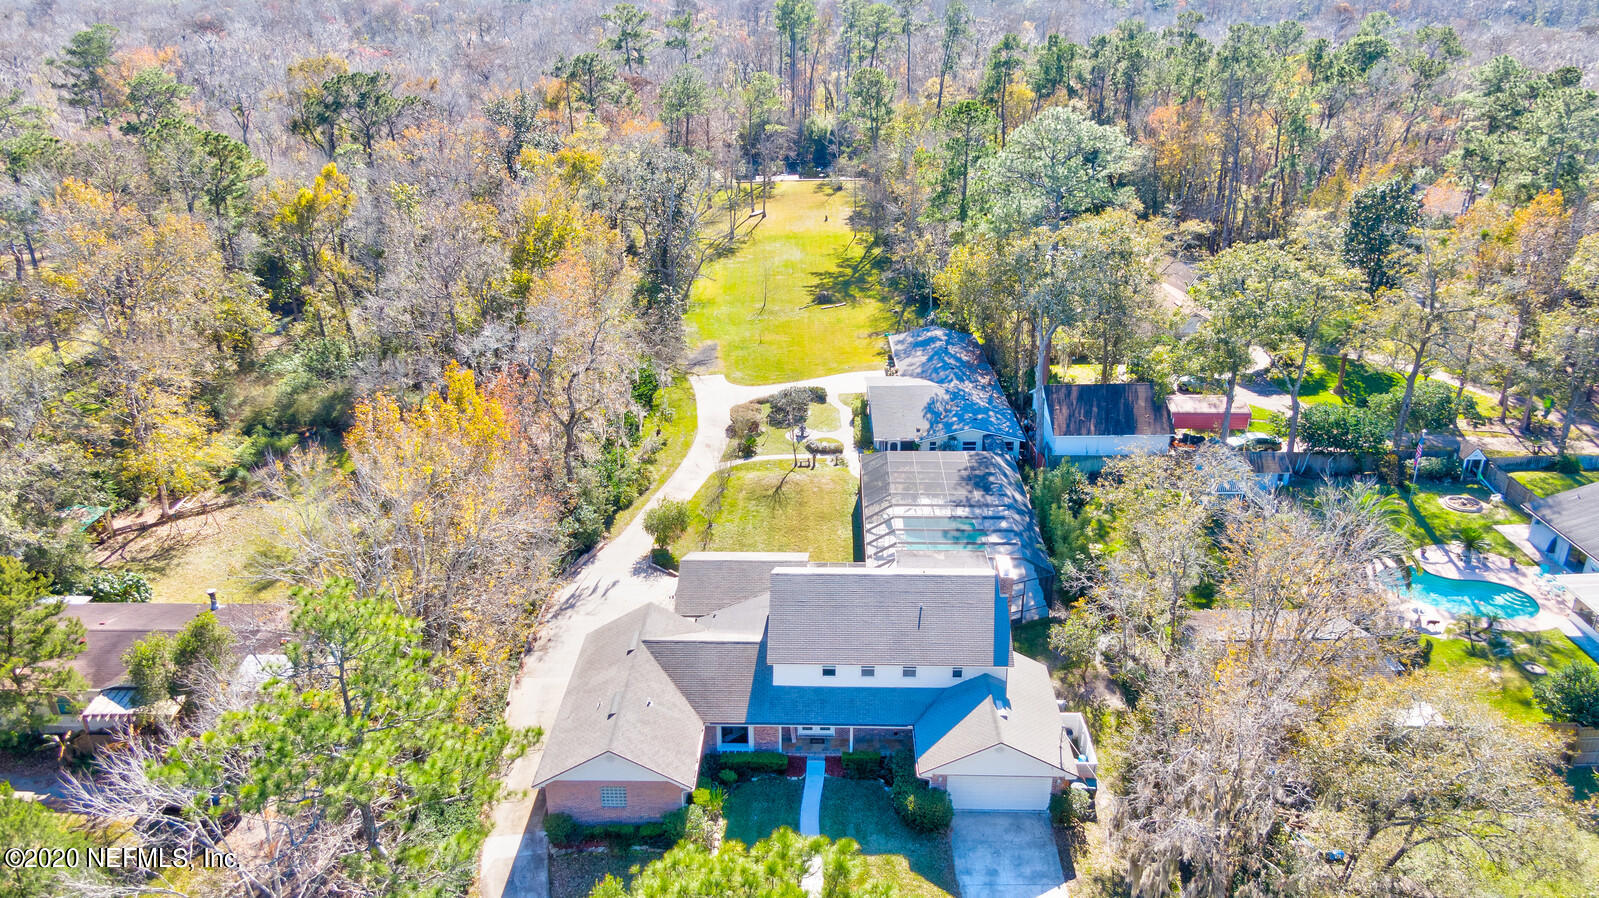 aerial view of a house with swimming pool and large trees